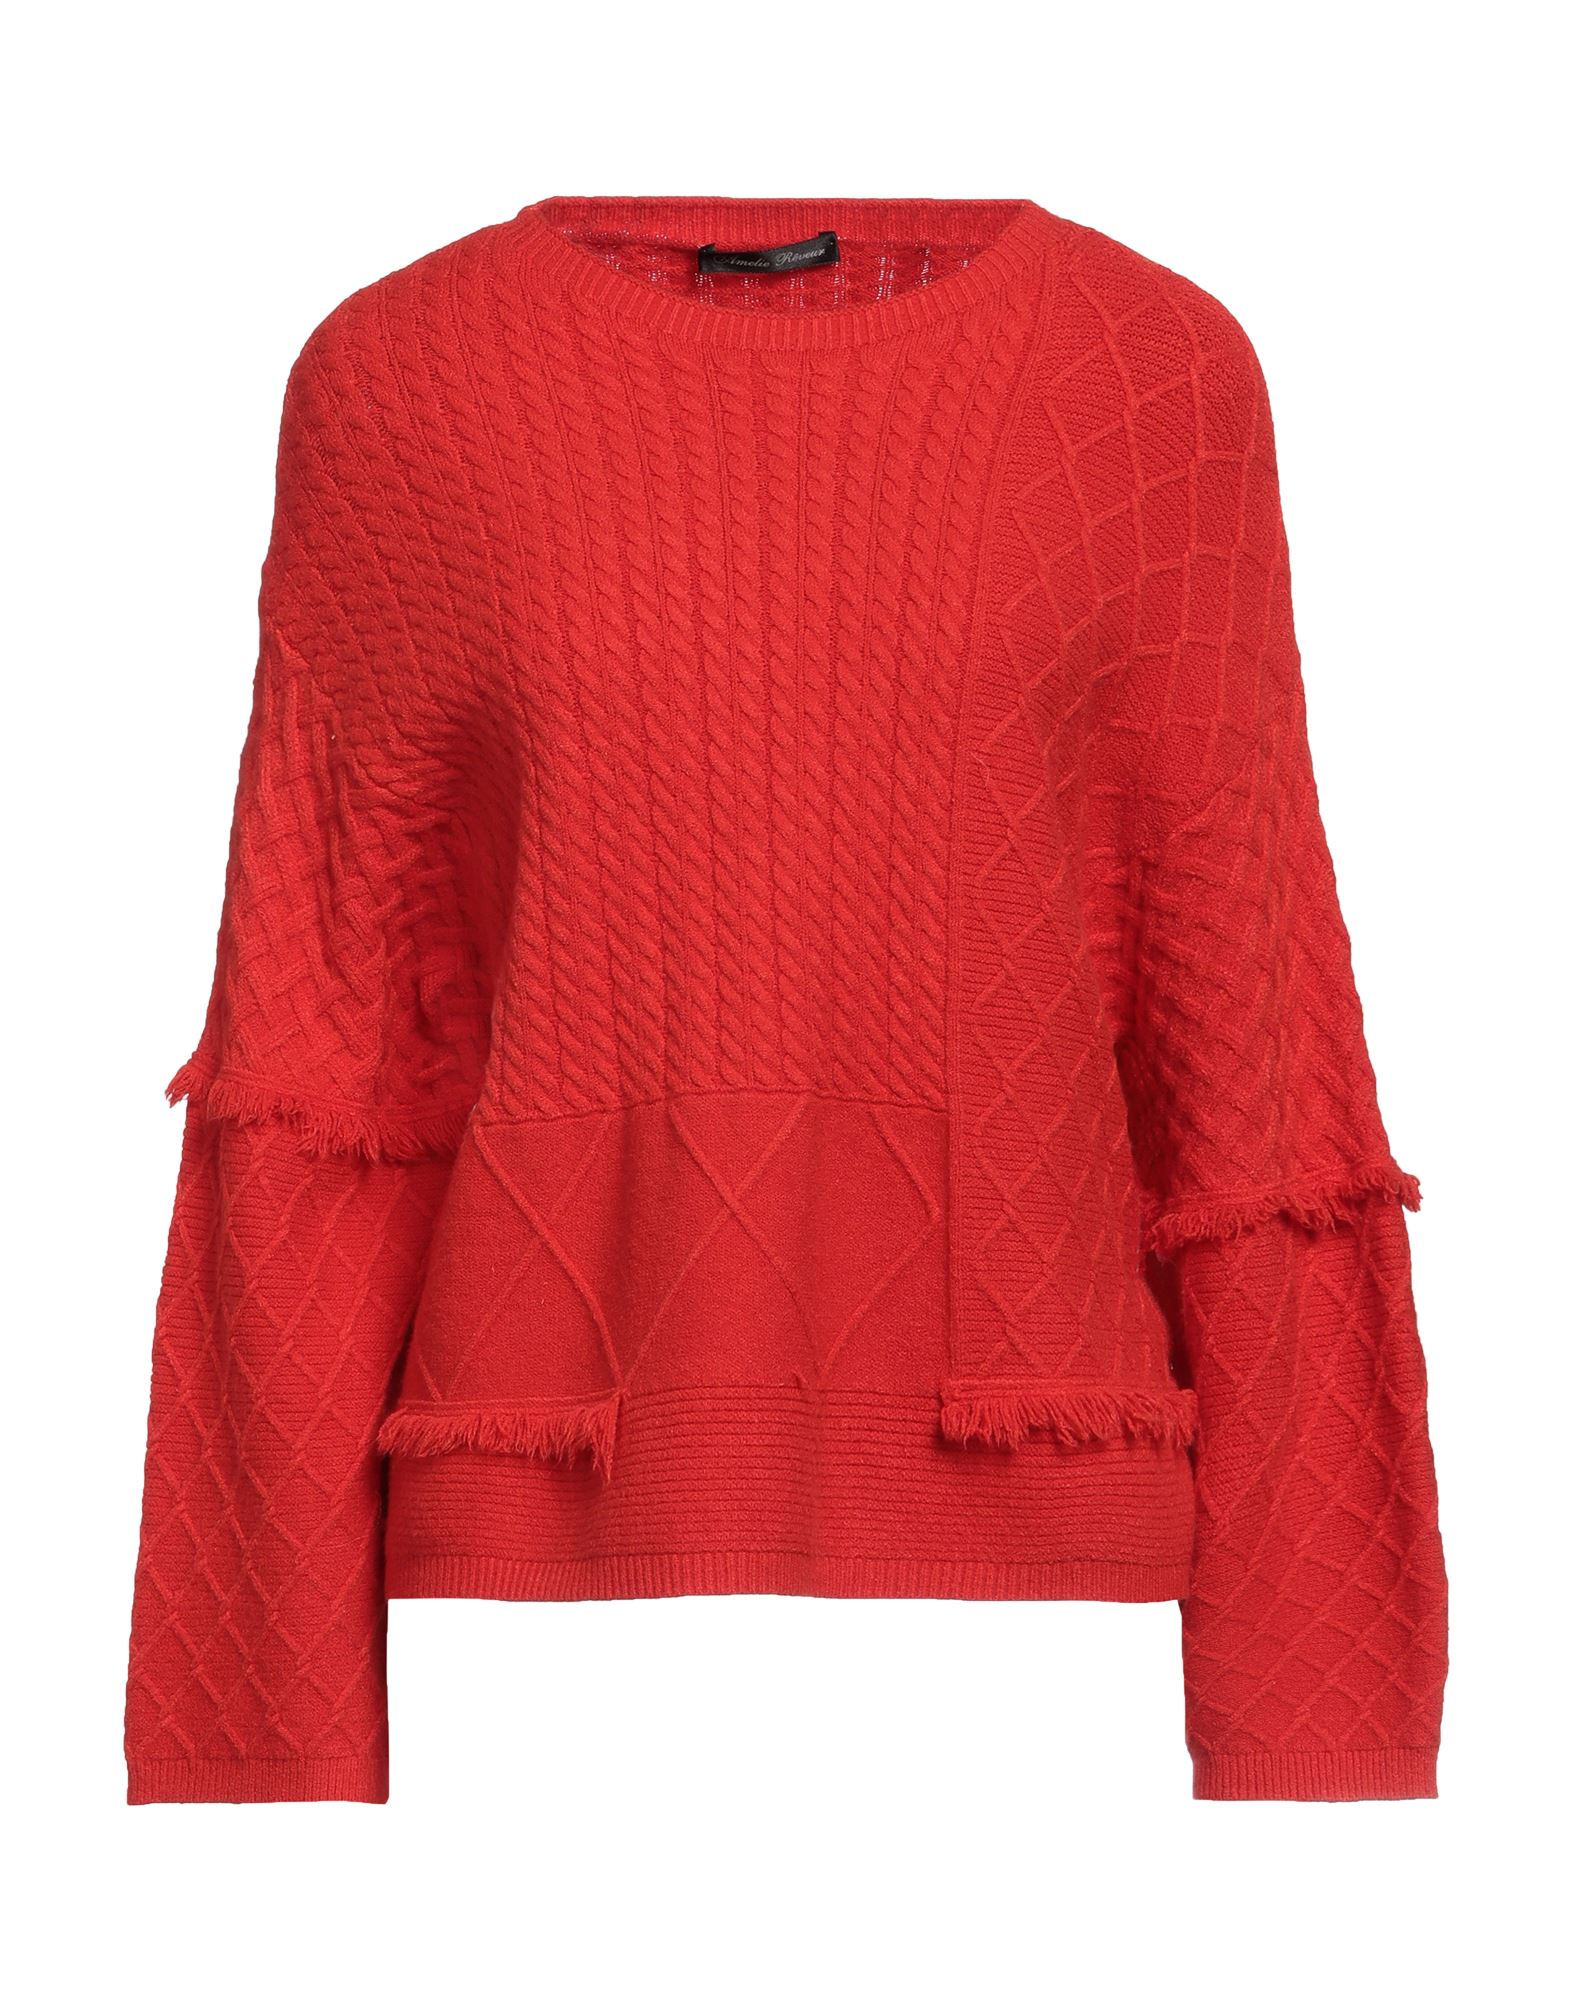 Amelie Rêveur Woman Sweater Red Size M/l Viscose, Polyester, Nylon